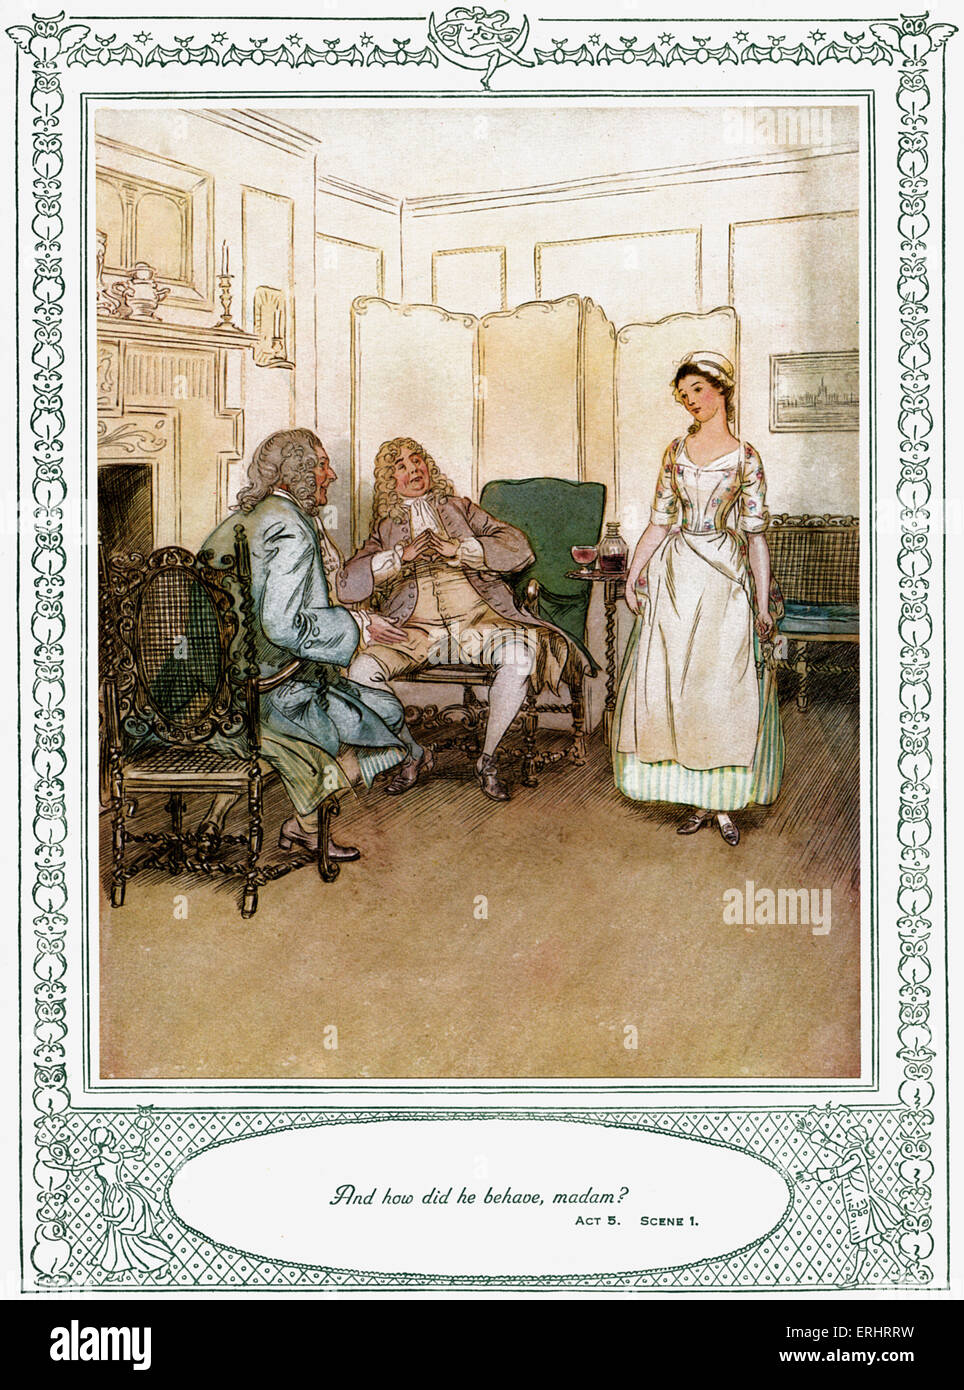 Oliver Goldsmith 's play - 'She Stoops to Conquer or The Mistakes of a Night'. Act 5, Scene 1 - 'And how did he behave, madam?'. Illustrated by Hugh Thomson, published by Hodder & Stoughton, London 1912. OG: Anglo-Irish writer, playwright, poet, physician 10 November 1730 or 1728 – 4 April 1774. Stock Photo